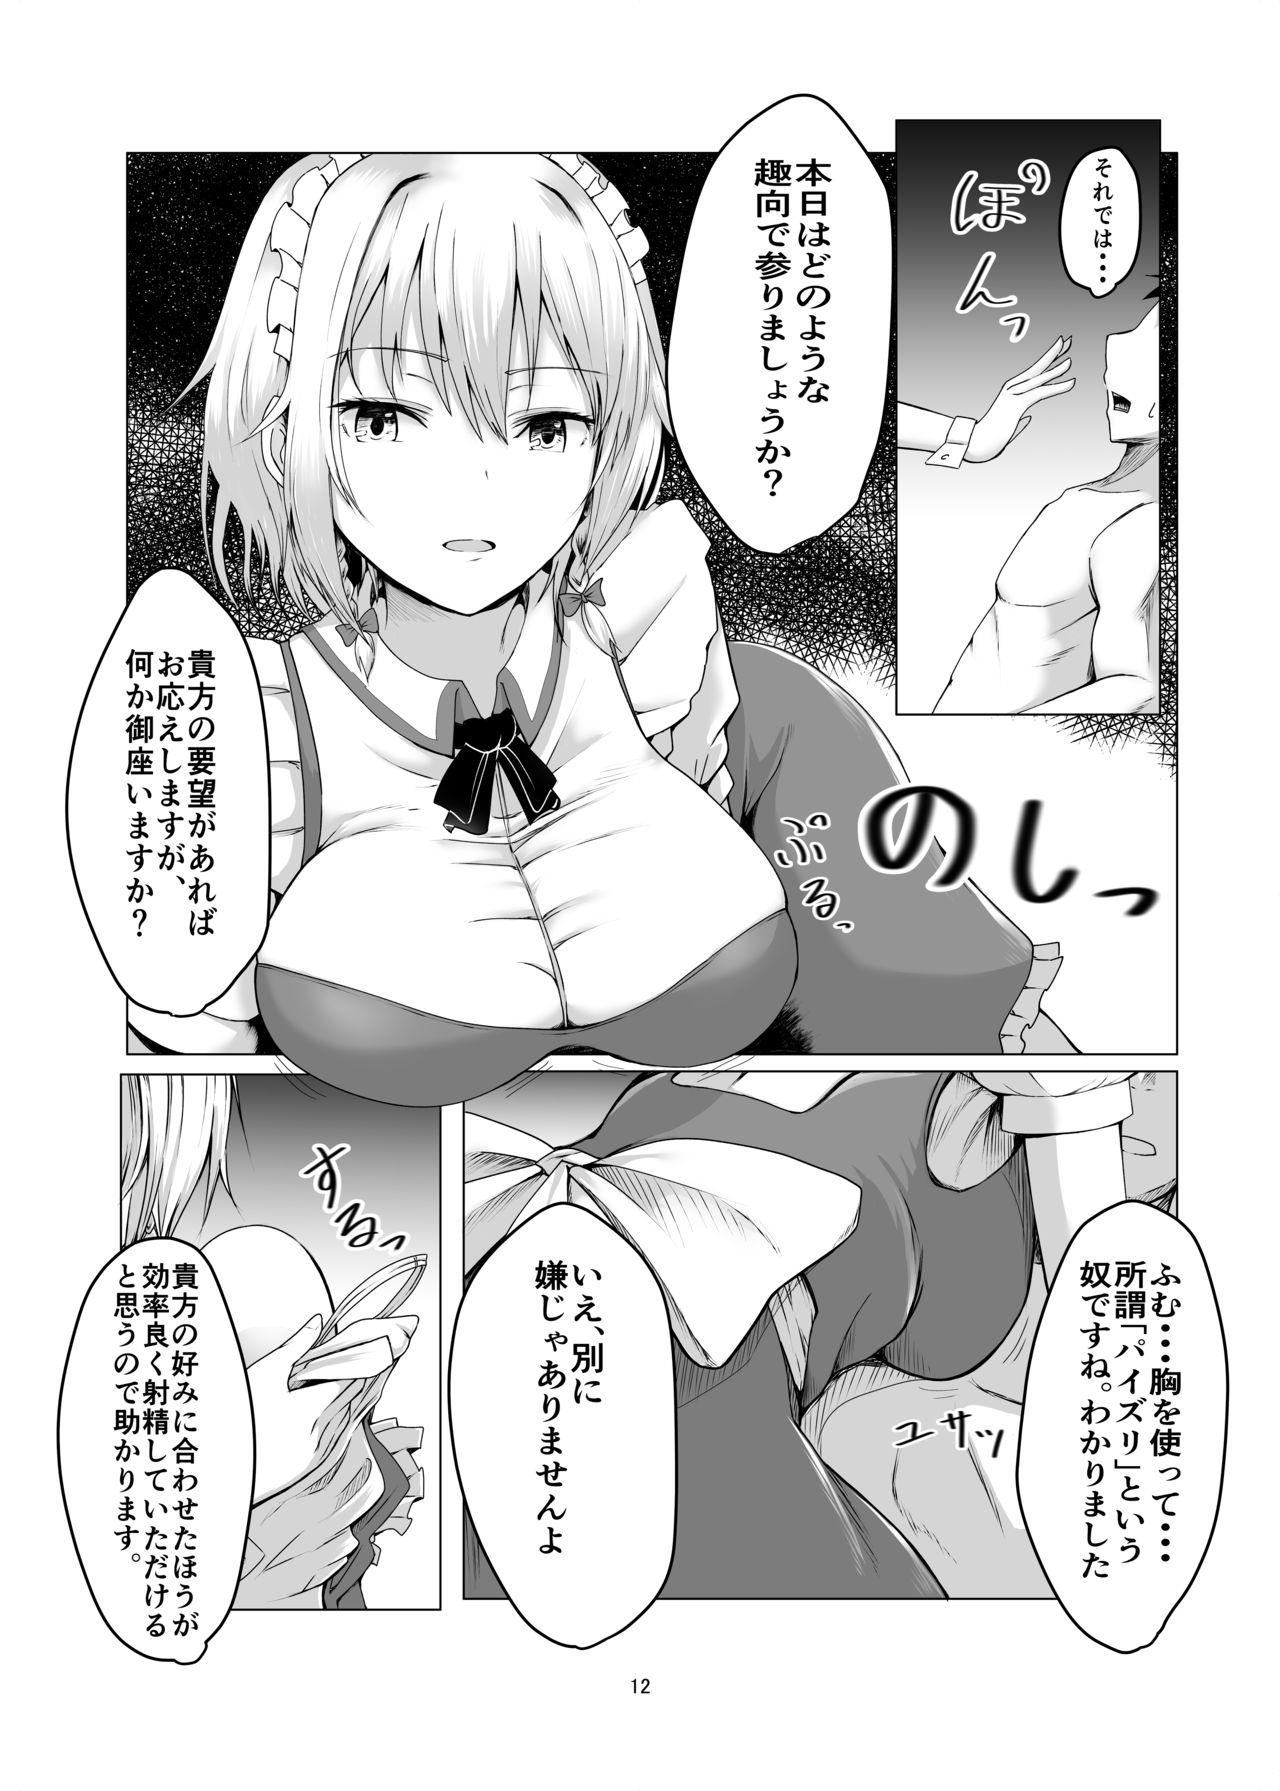 Old Young 咲夜さんに淡々と搾精されるマンガ - Touhou project Stepson - Page 11